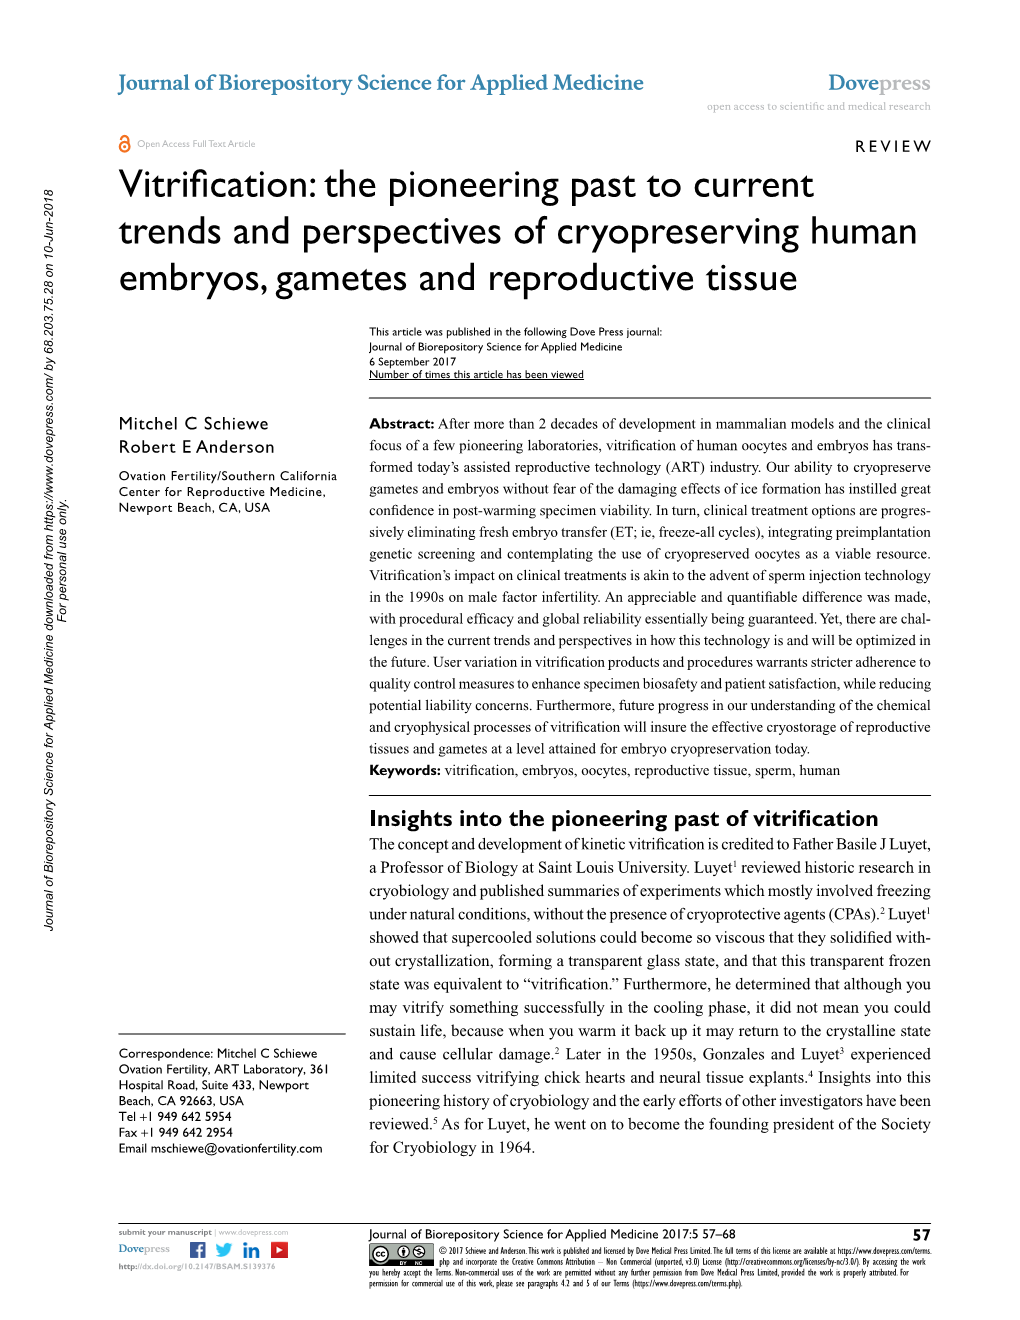 Vitrification of Human Gametes and Embryos Open Access to Scientific and Medical Research DOI